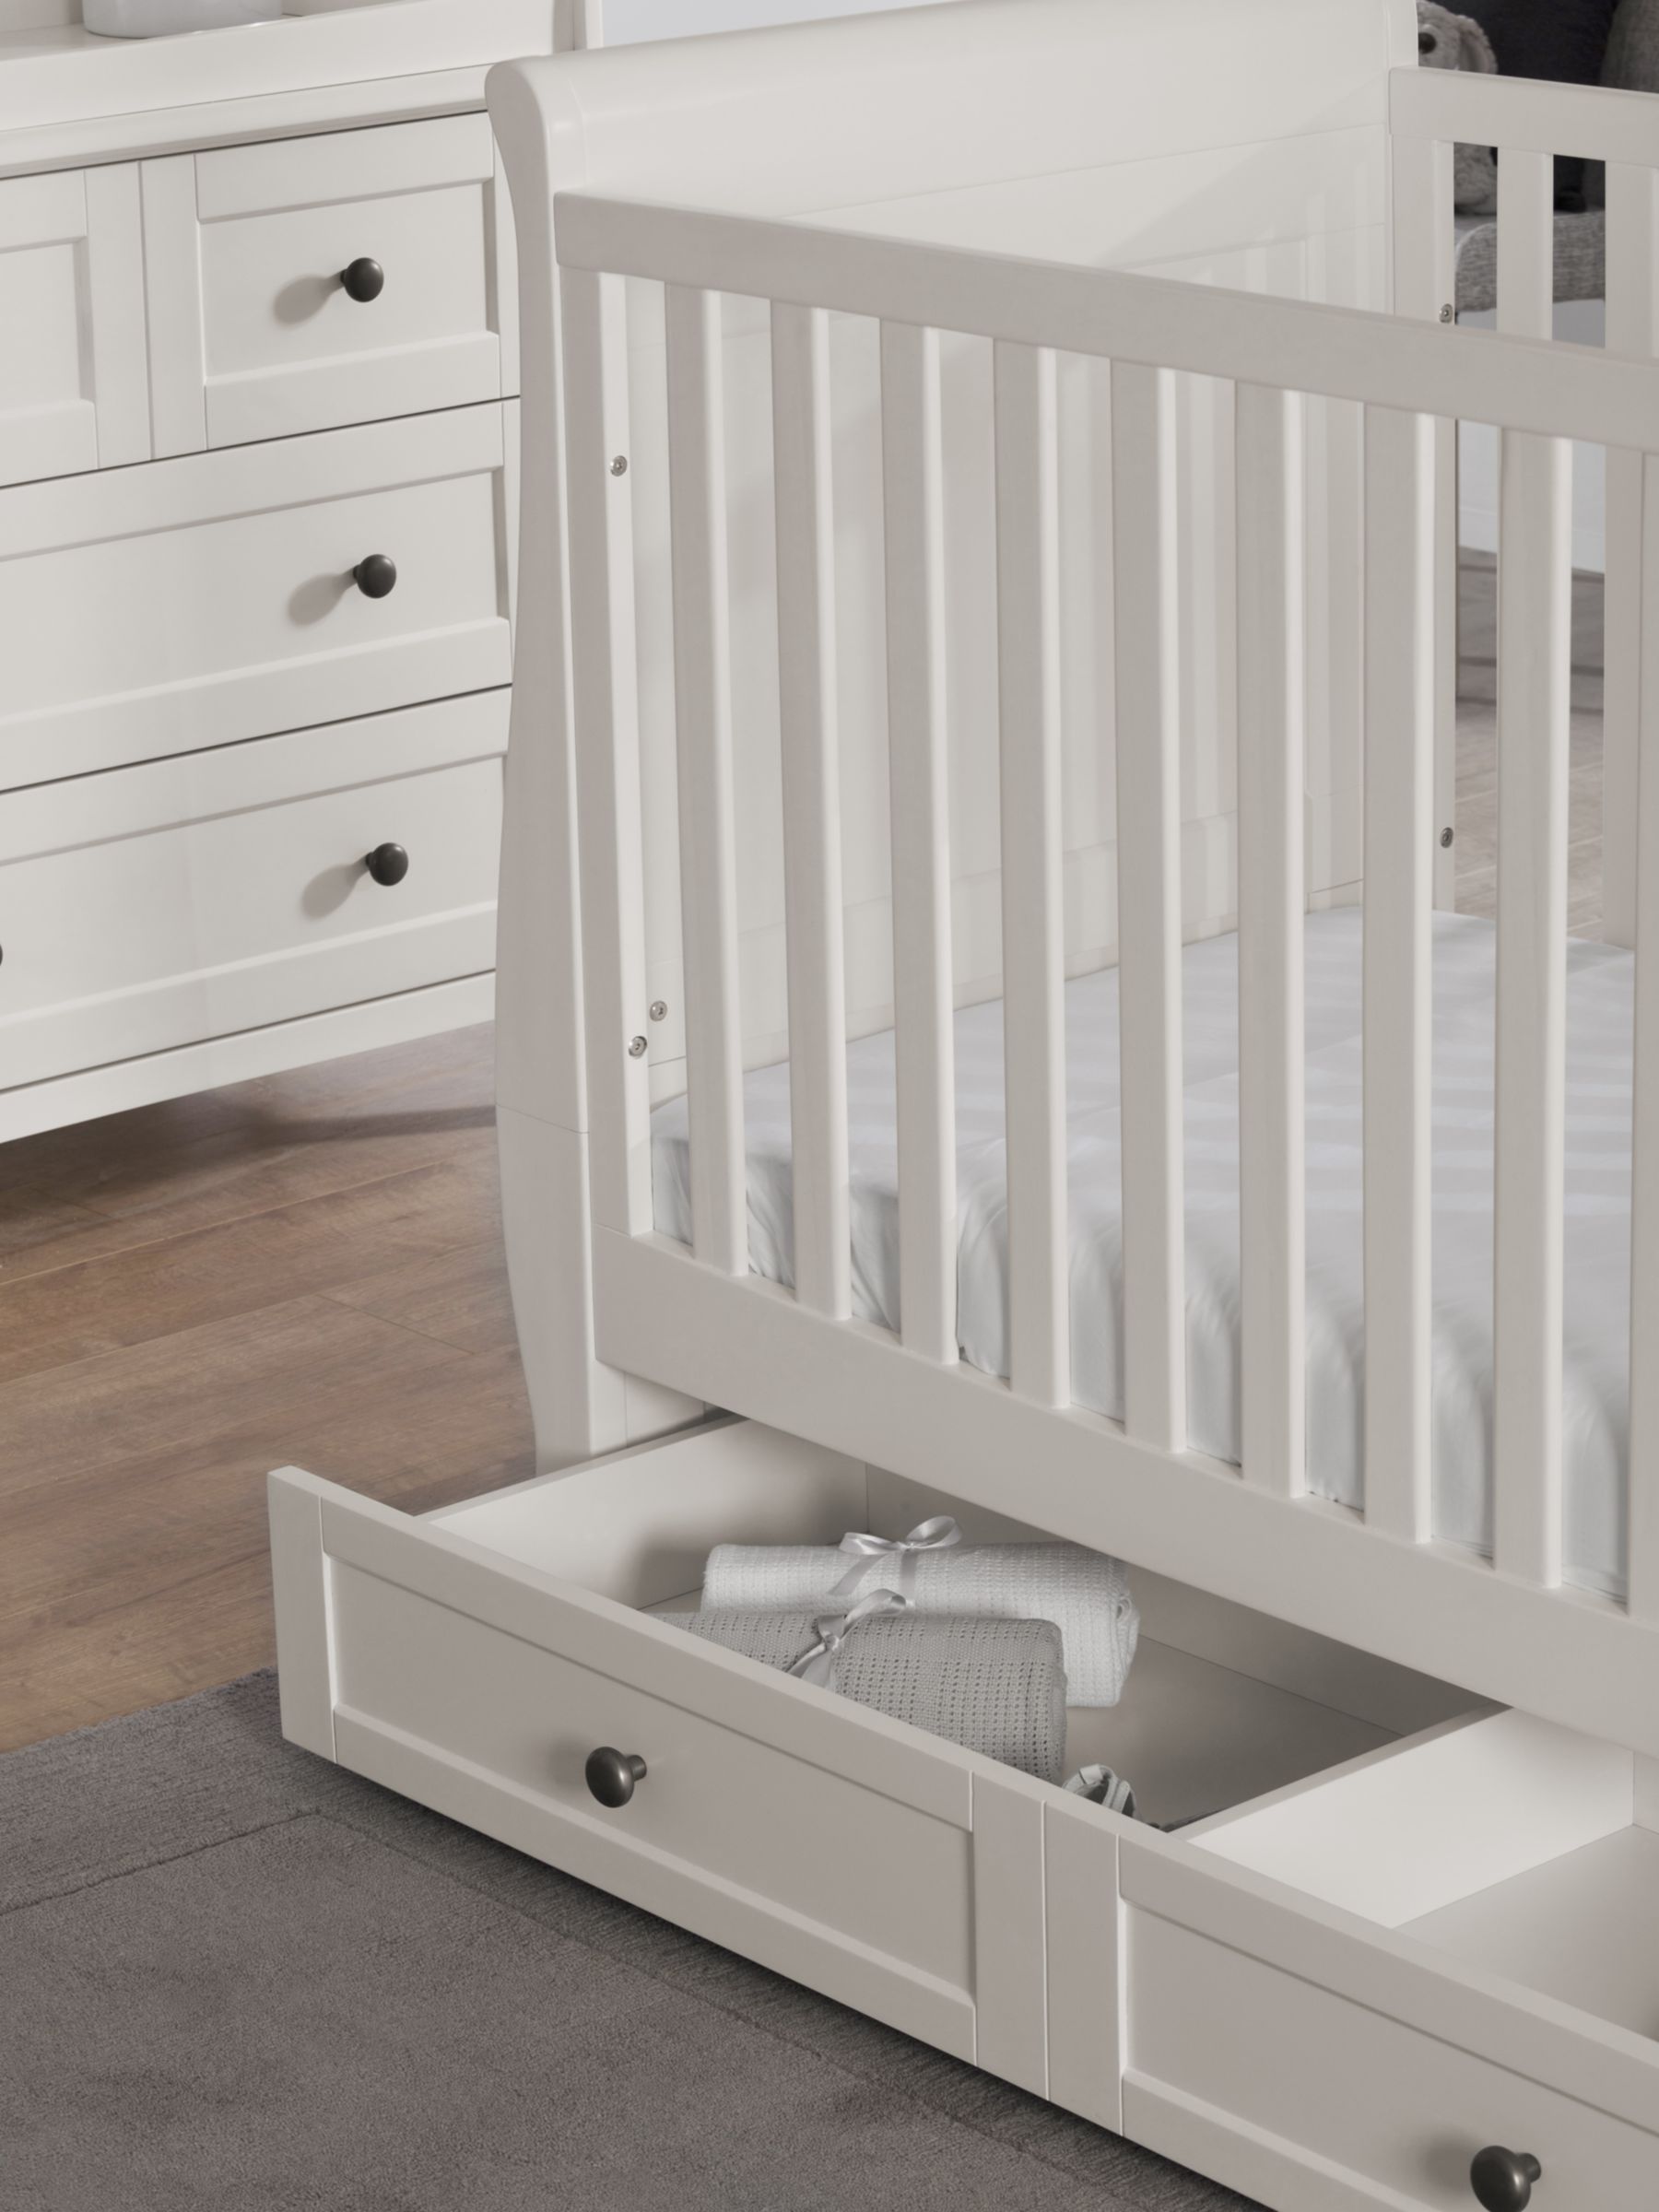 silver cross sleigh cot bed